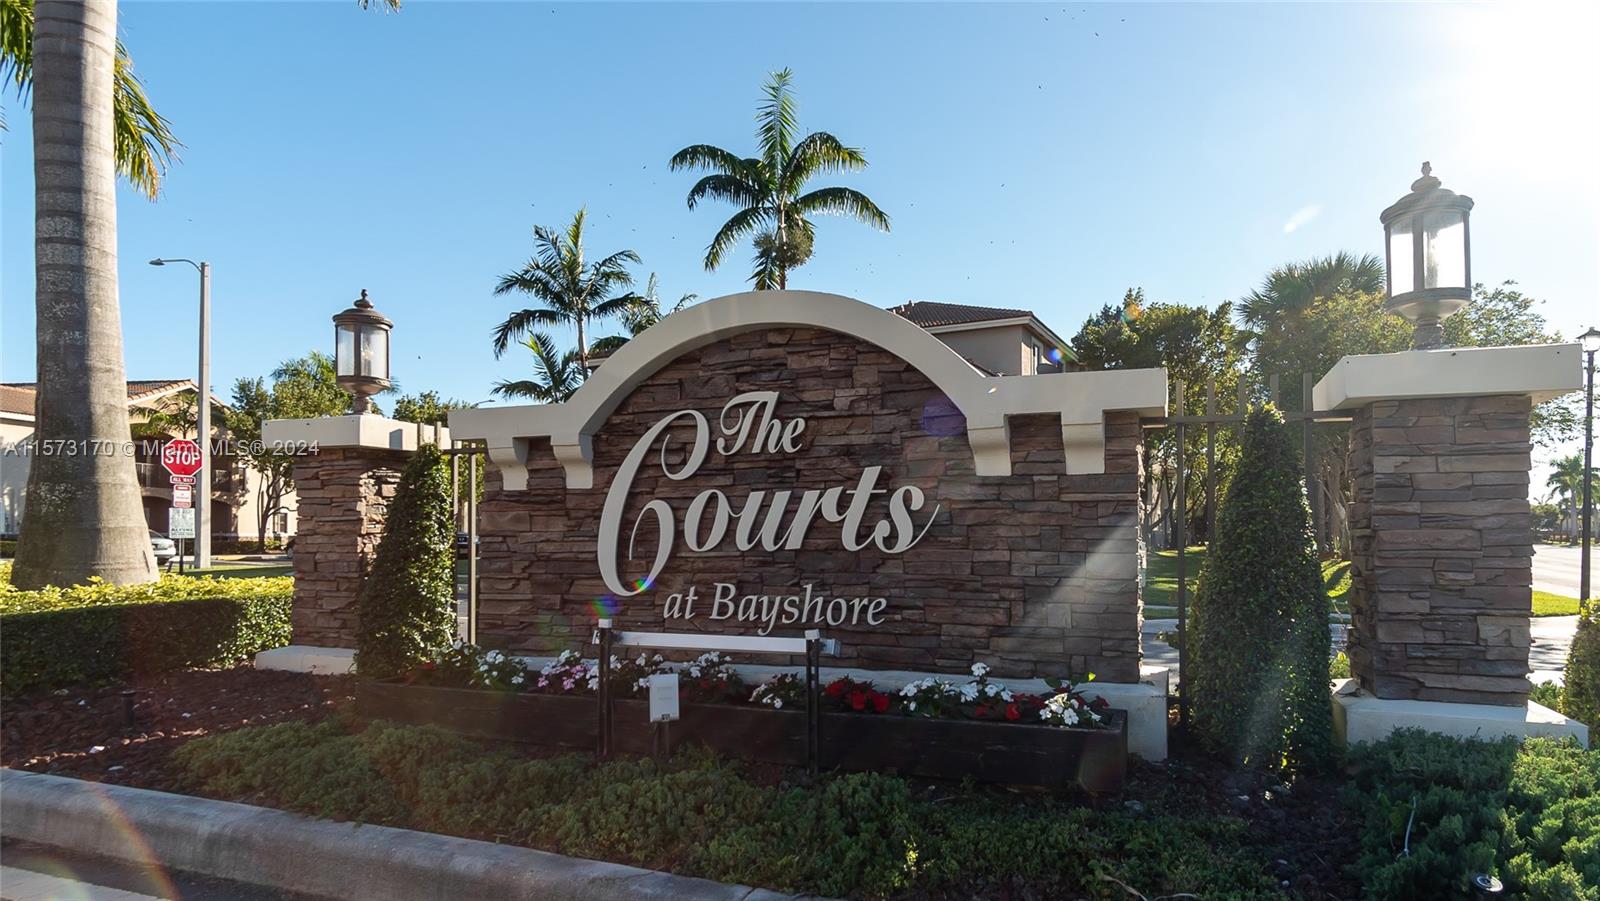 Beautiful 2 bed and 2 bath unit on the first floor, located in a luxurious residential community of Isles at Bayshore in Cutler Bay; includes electrical appliances, the kitchen has granite tops . The complex comprises a beautiful resort-style Club House, swimming pool, gym, sauna etc... The area stands out for having magnet schools, hospitals, Performing Art Center, diversity of restaurants and shops.